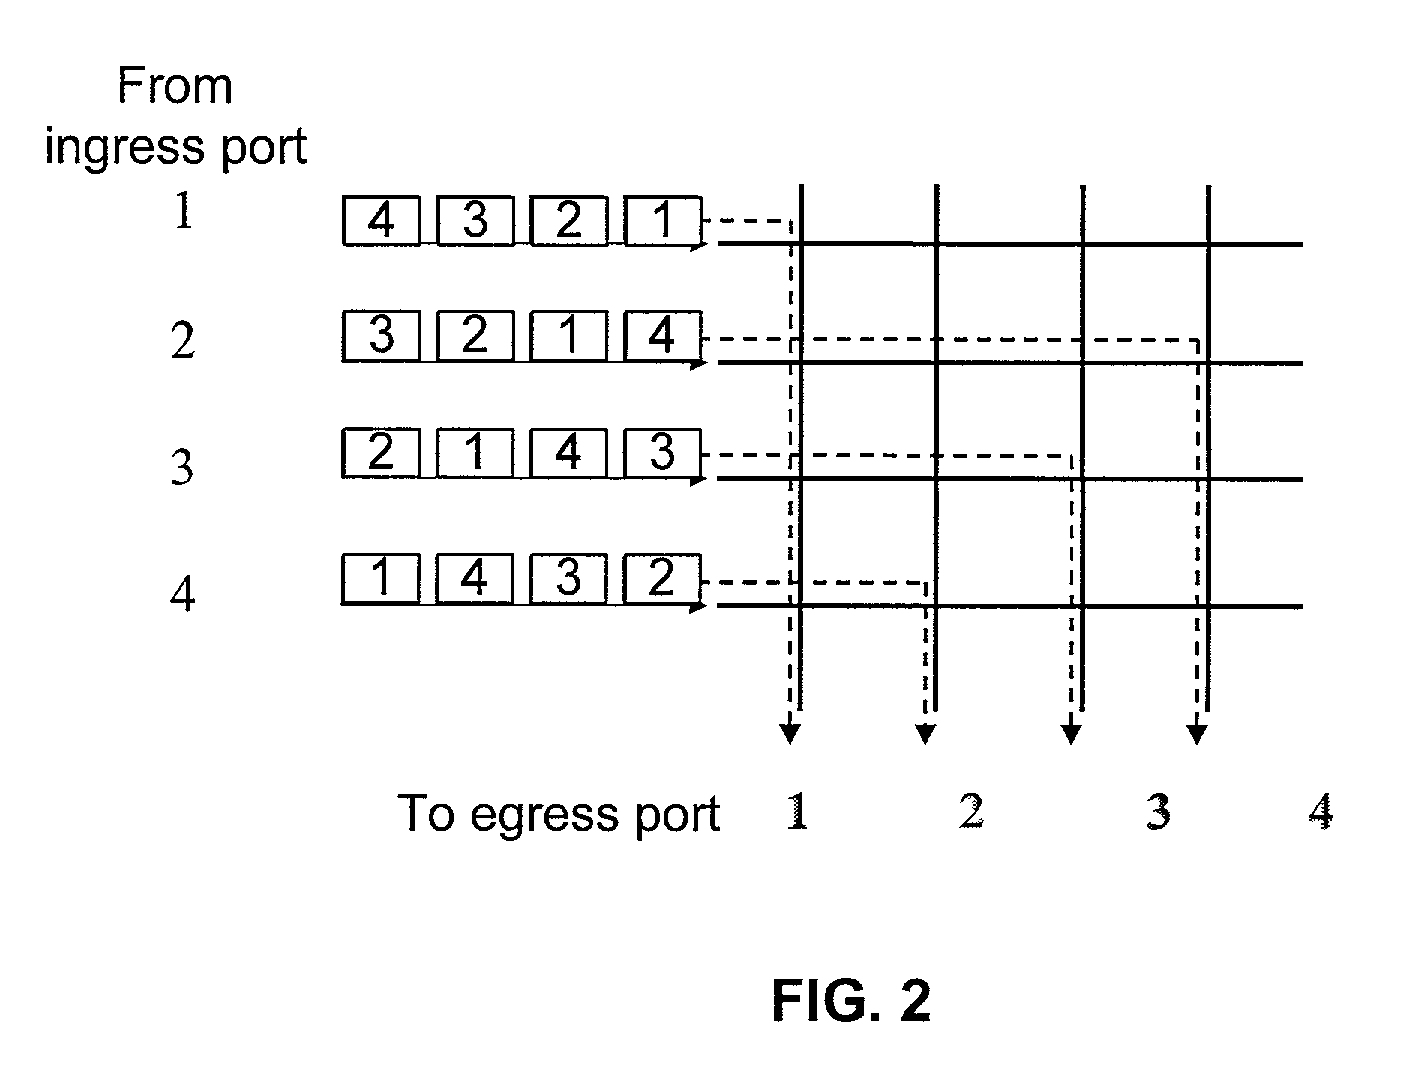 Method for dynamically computing a switching schedule